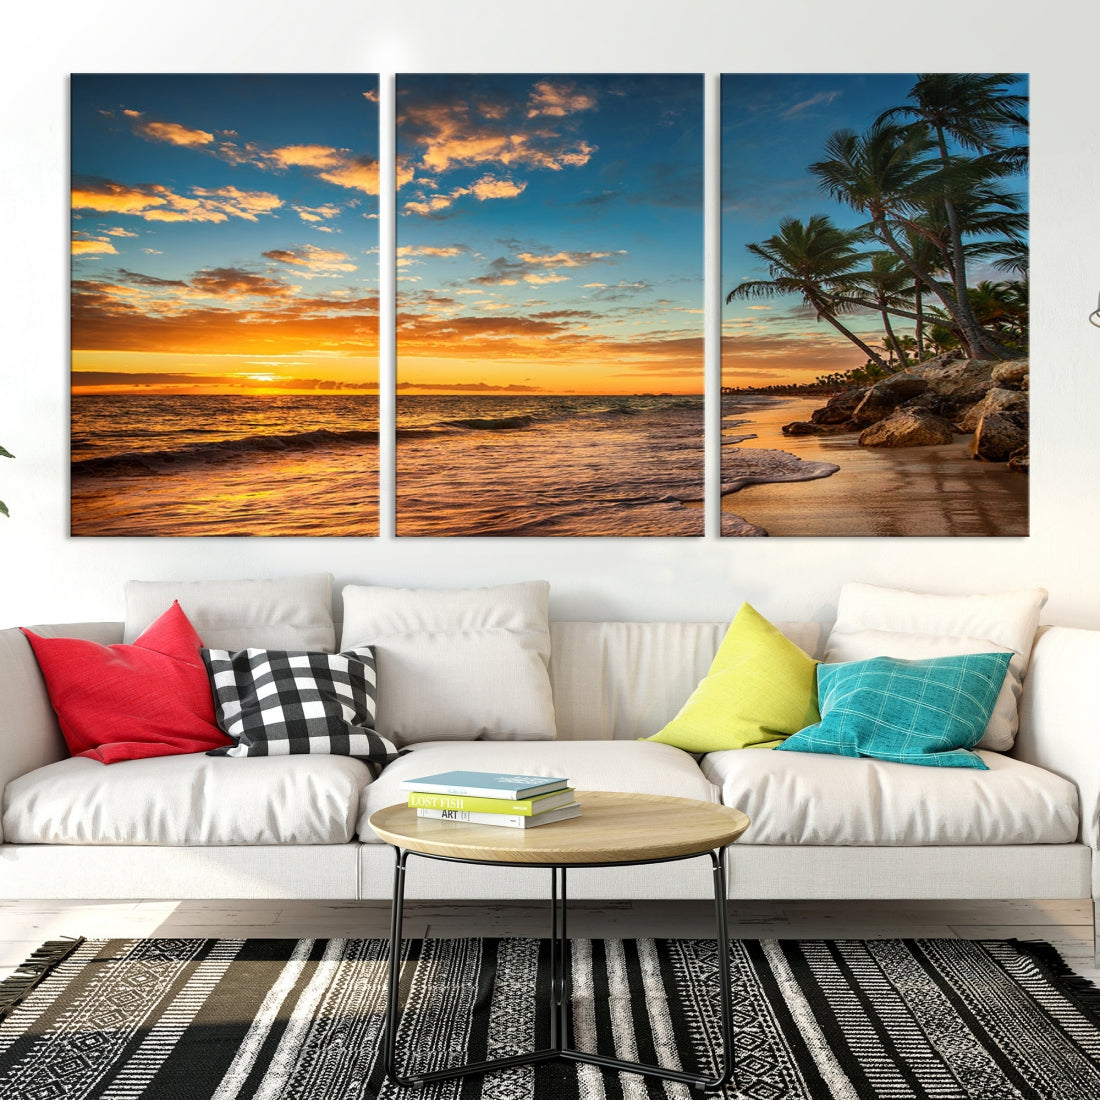 Tropical Beach and Sunset Artwork Wall Art Canvas Print for Living Room Bedroom Decor